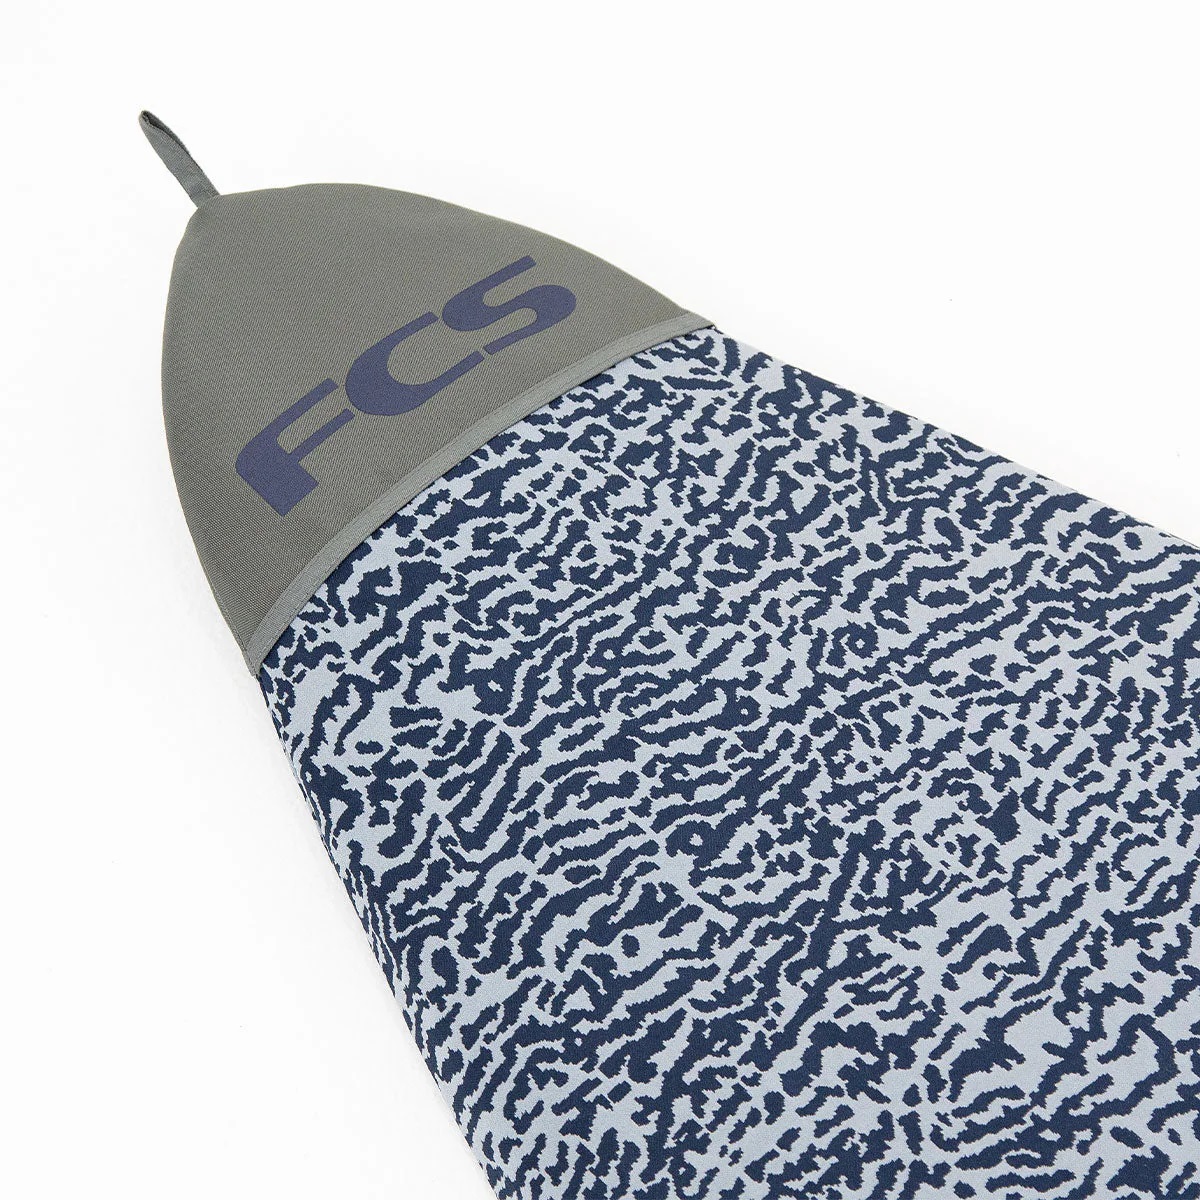 FCS STRETCH ALL PURPOSE COVER  6'0" カラー2種類 サーフボードケース